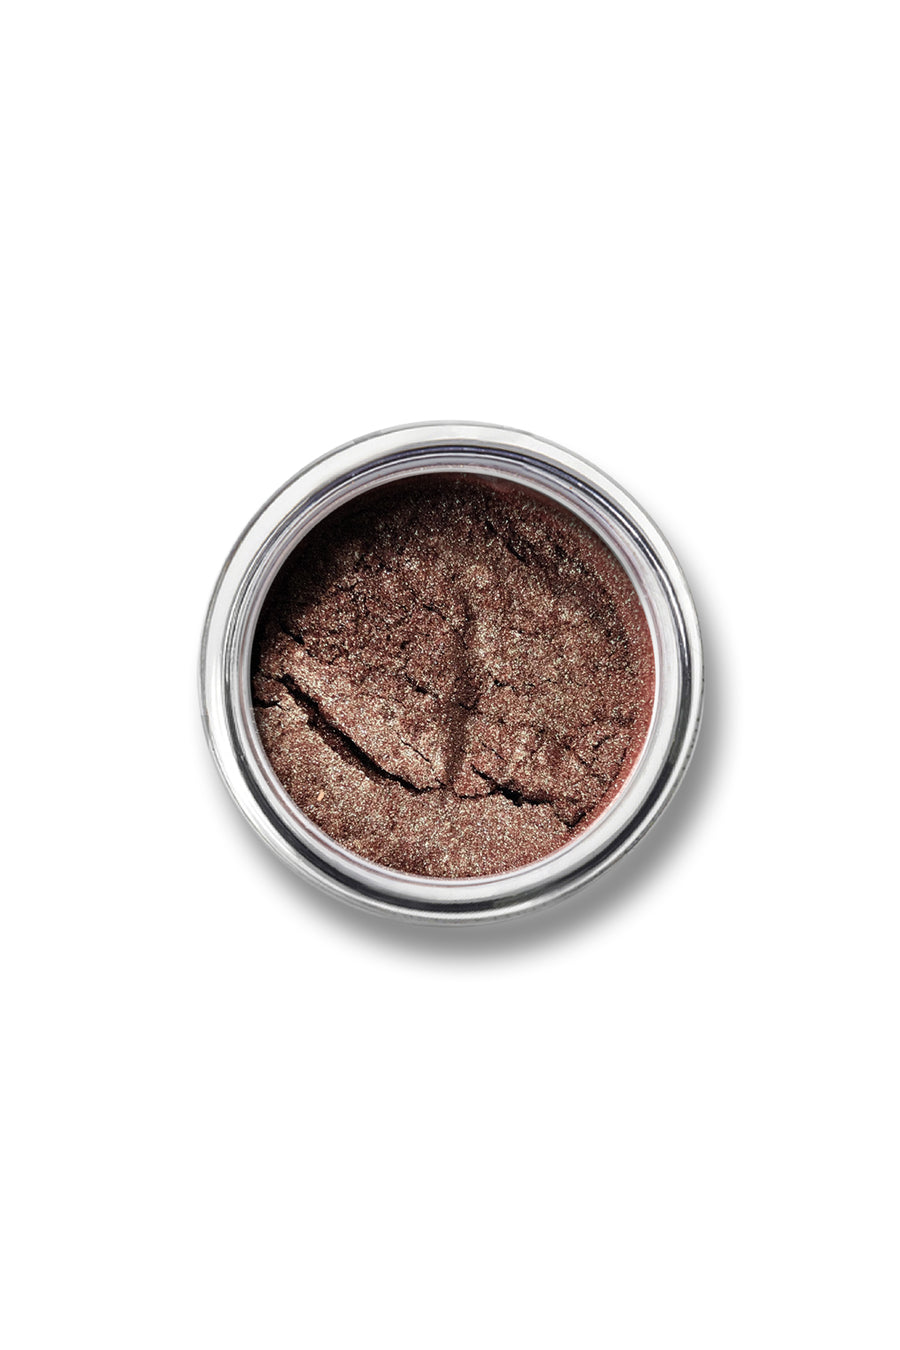 Shimmer Eyeshadow #54 - Copper Sand - Blend Mineral Cosmetics